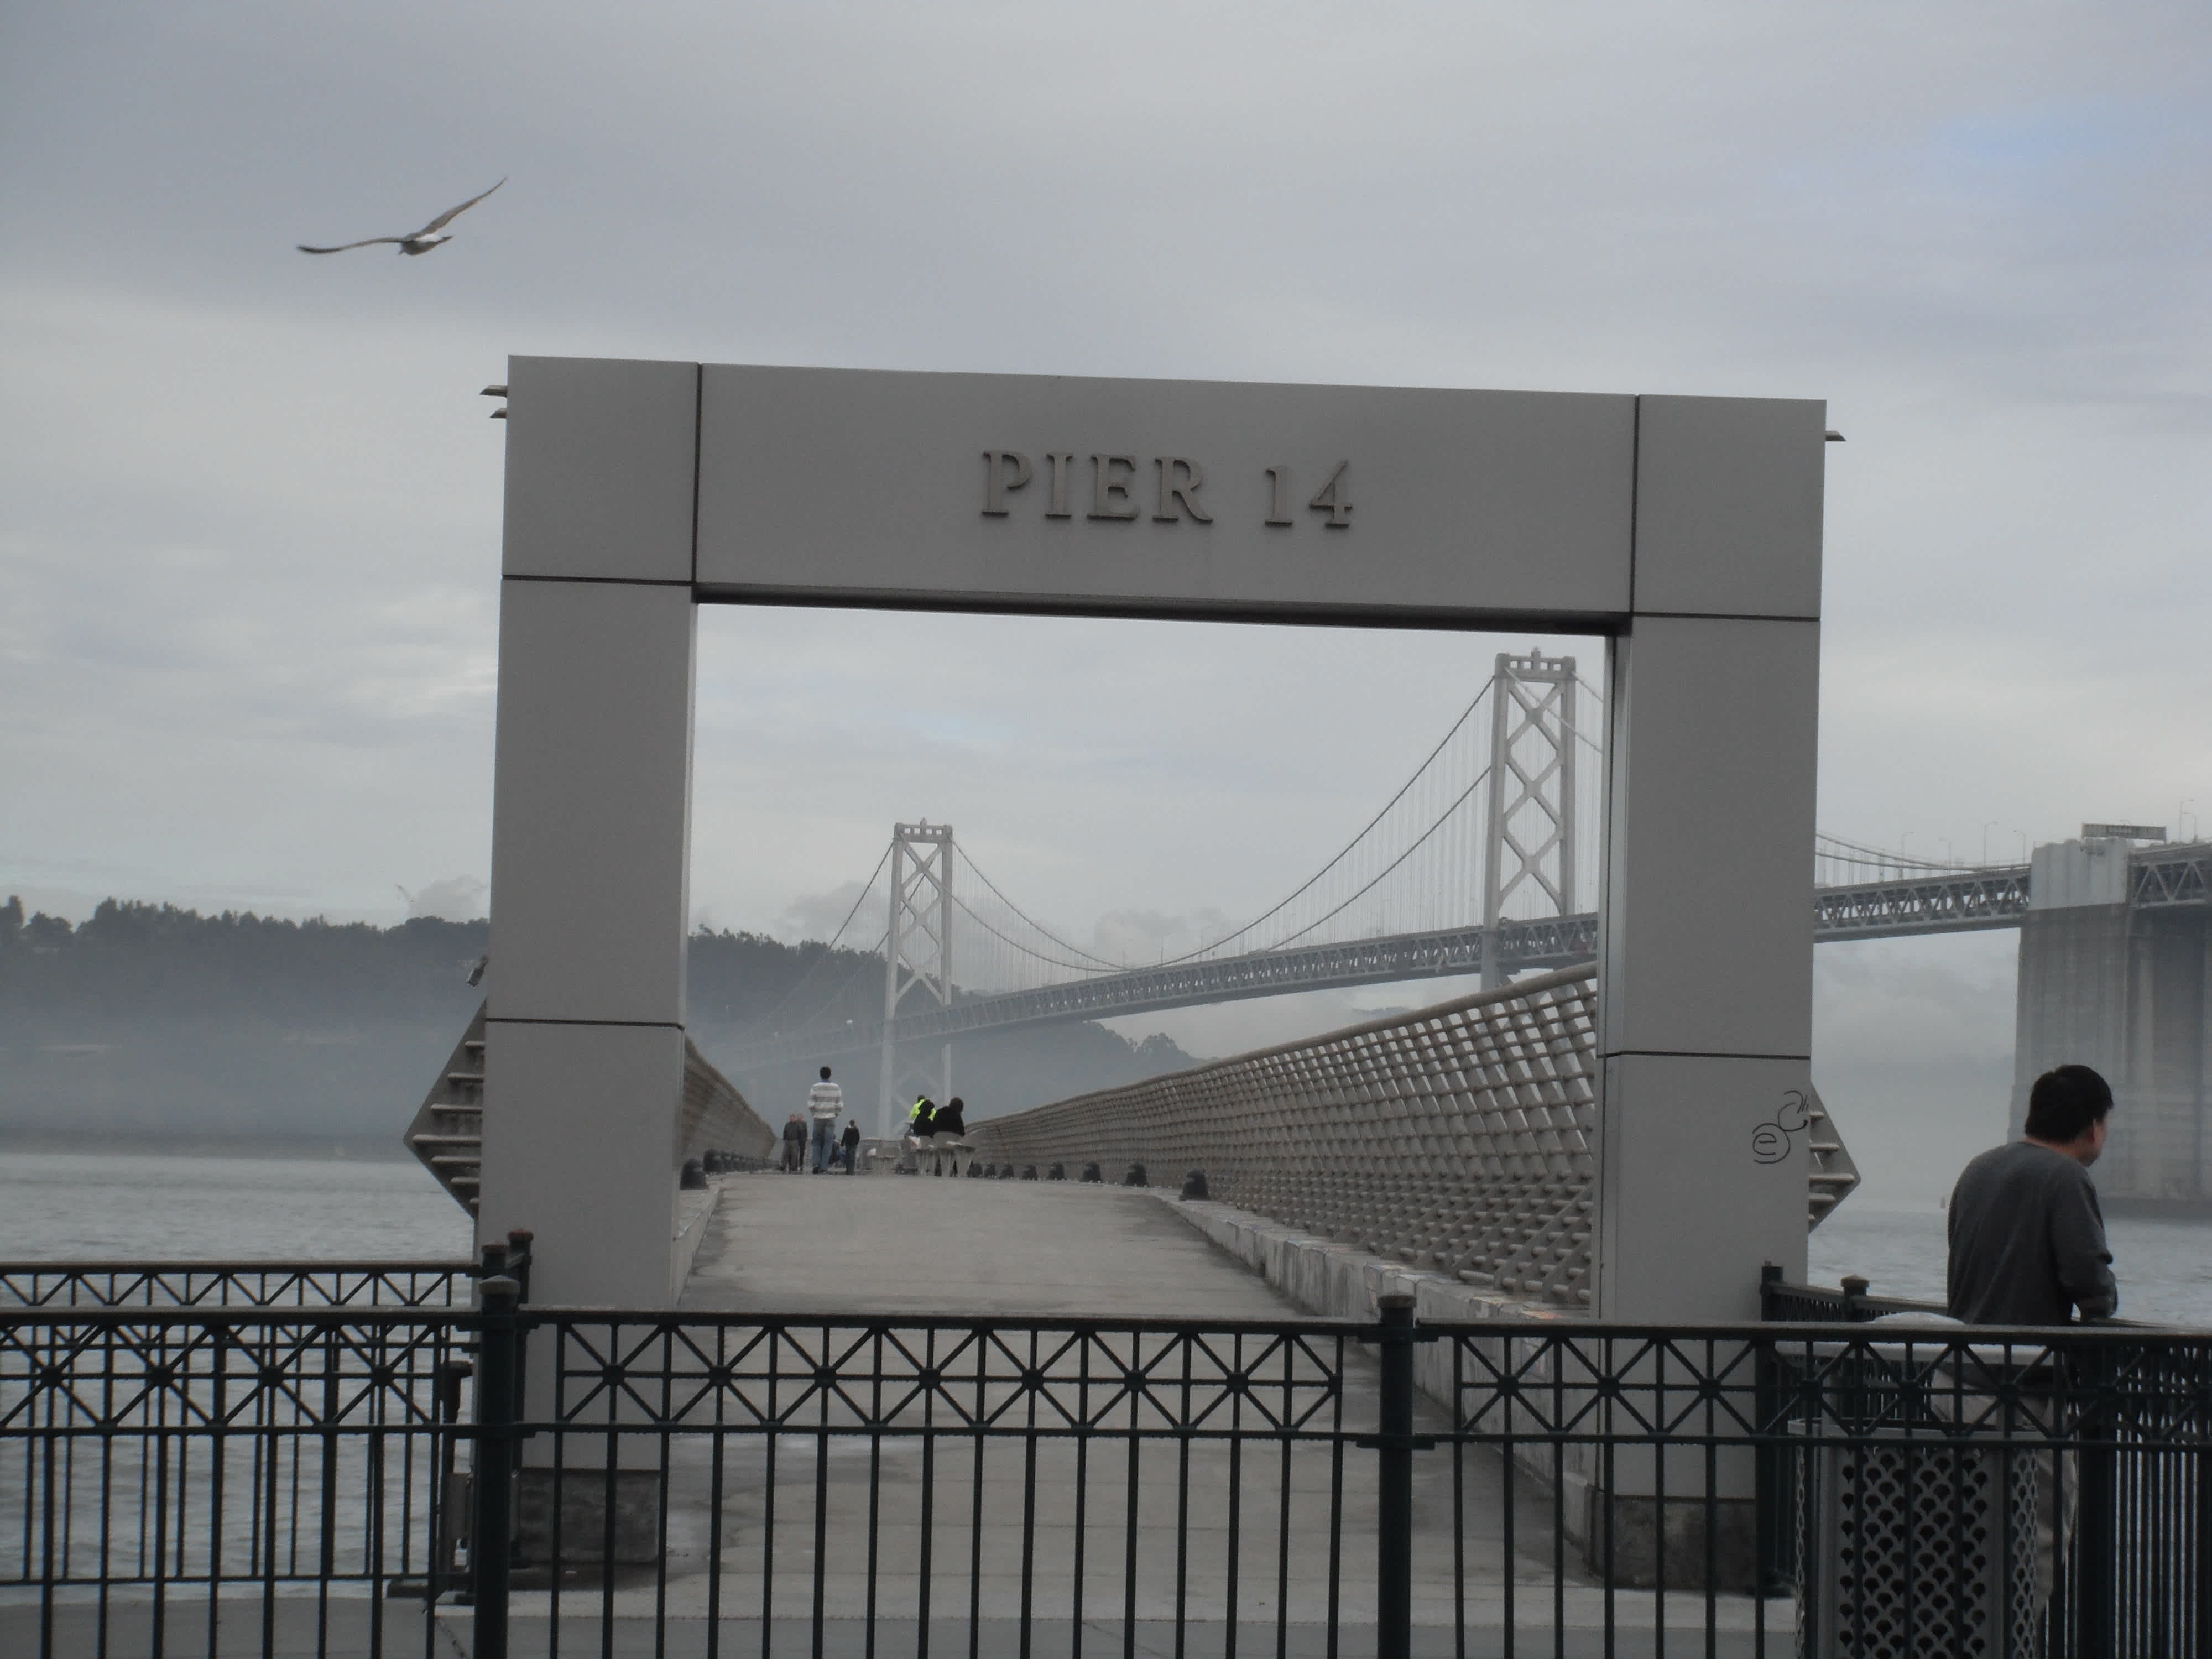 Pier 14 sign in front of a bridge in Ferry Building, San Francisco, California. 